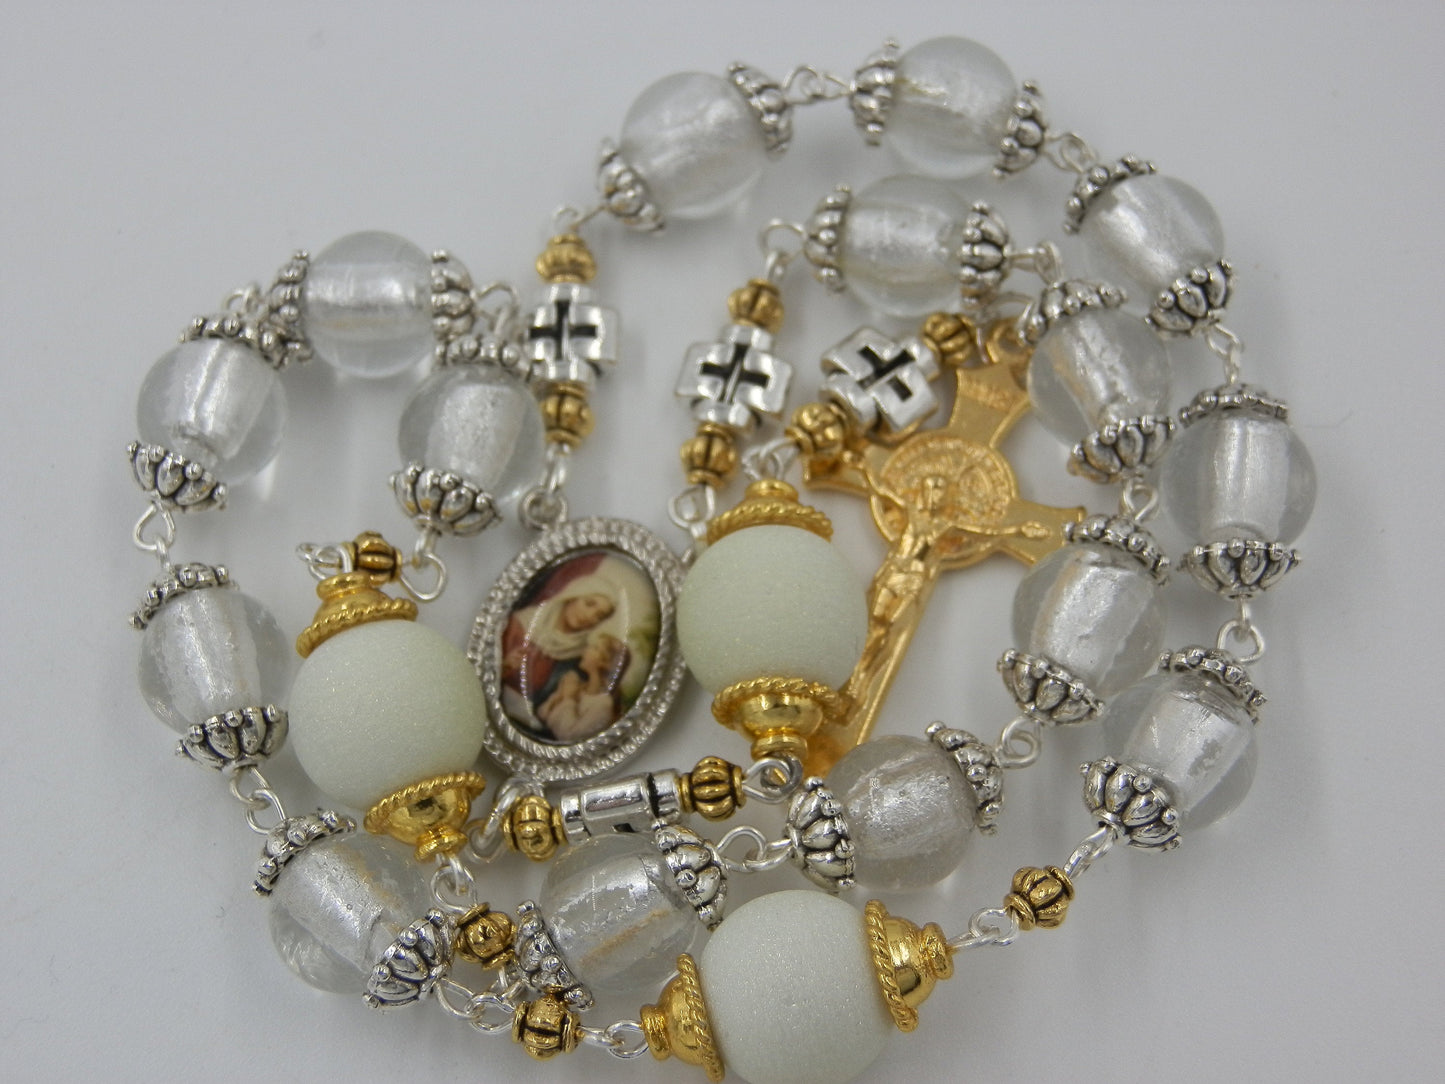 Stunning St. Ann prayer chaplet, Handcrafted glass beads, St. Benedict Crucifix, St. Anne Rosaries, Rosary beads, Heirloom Rosaries.